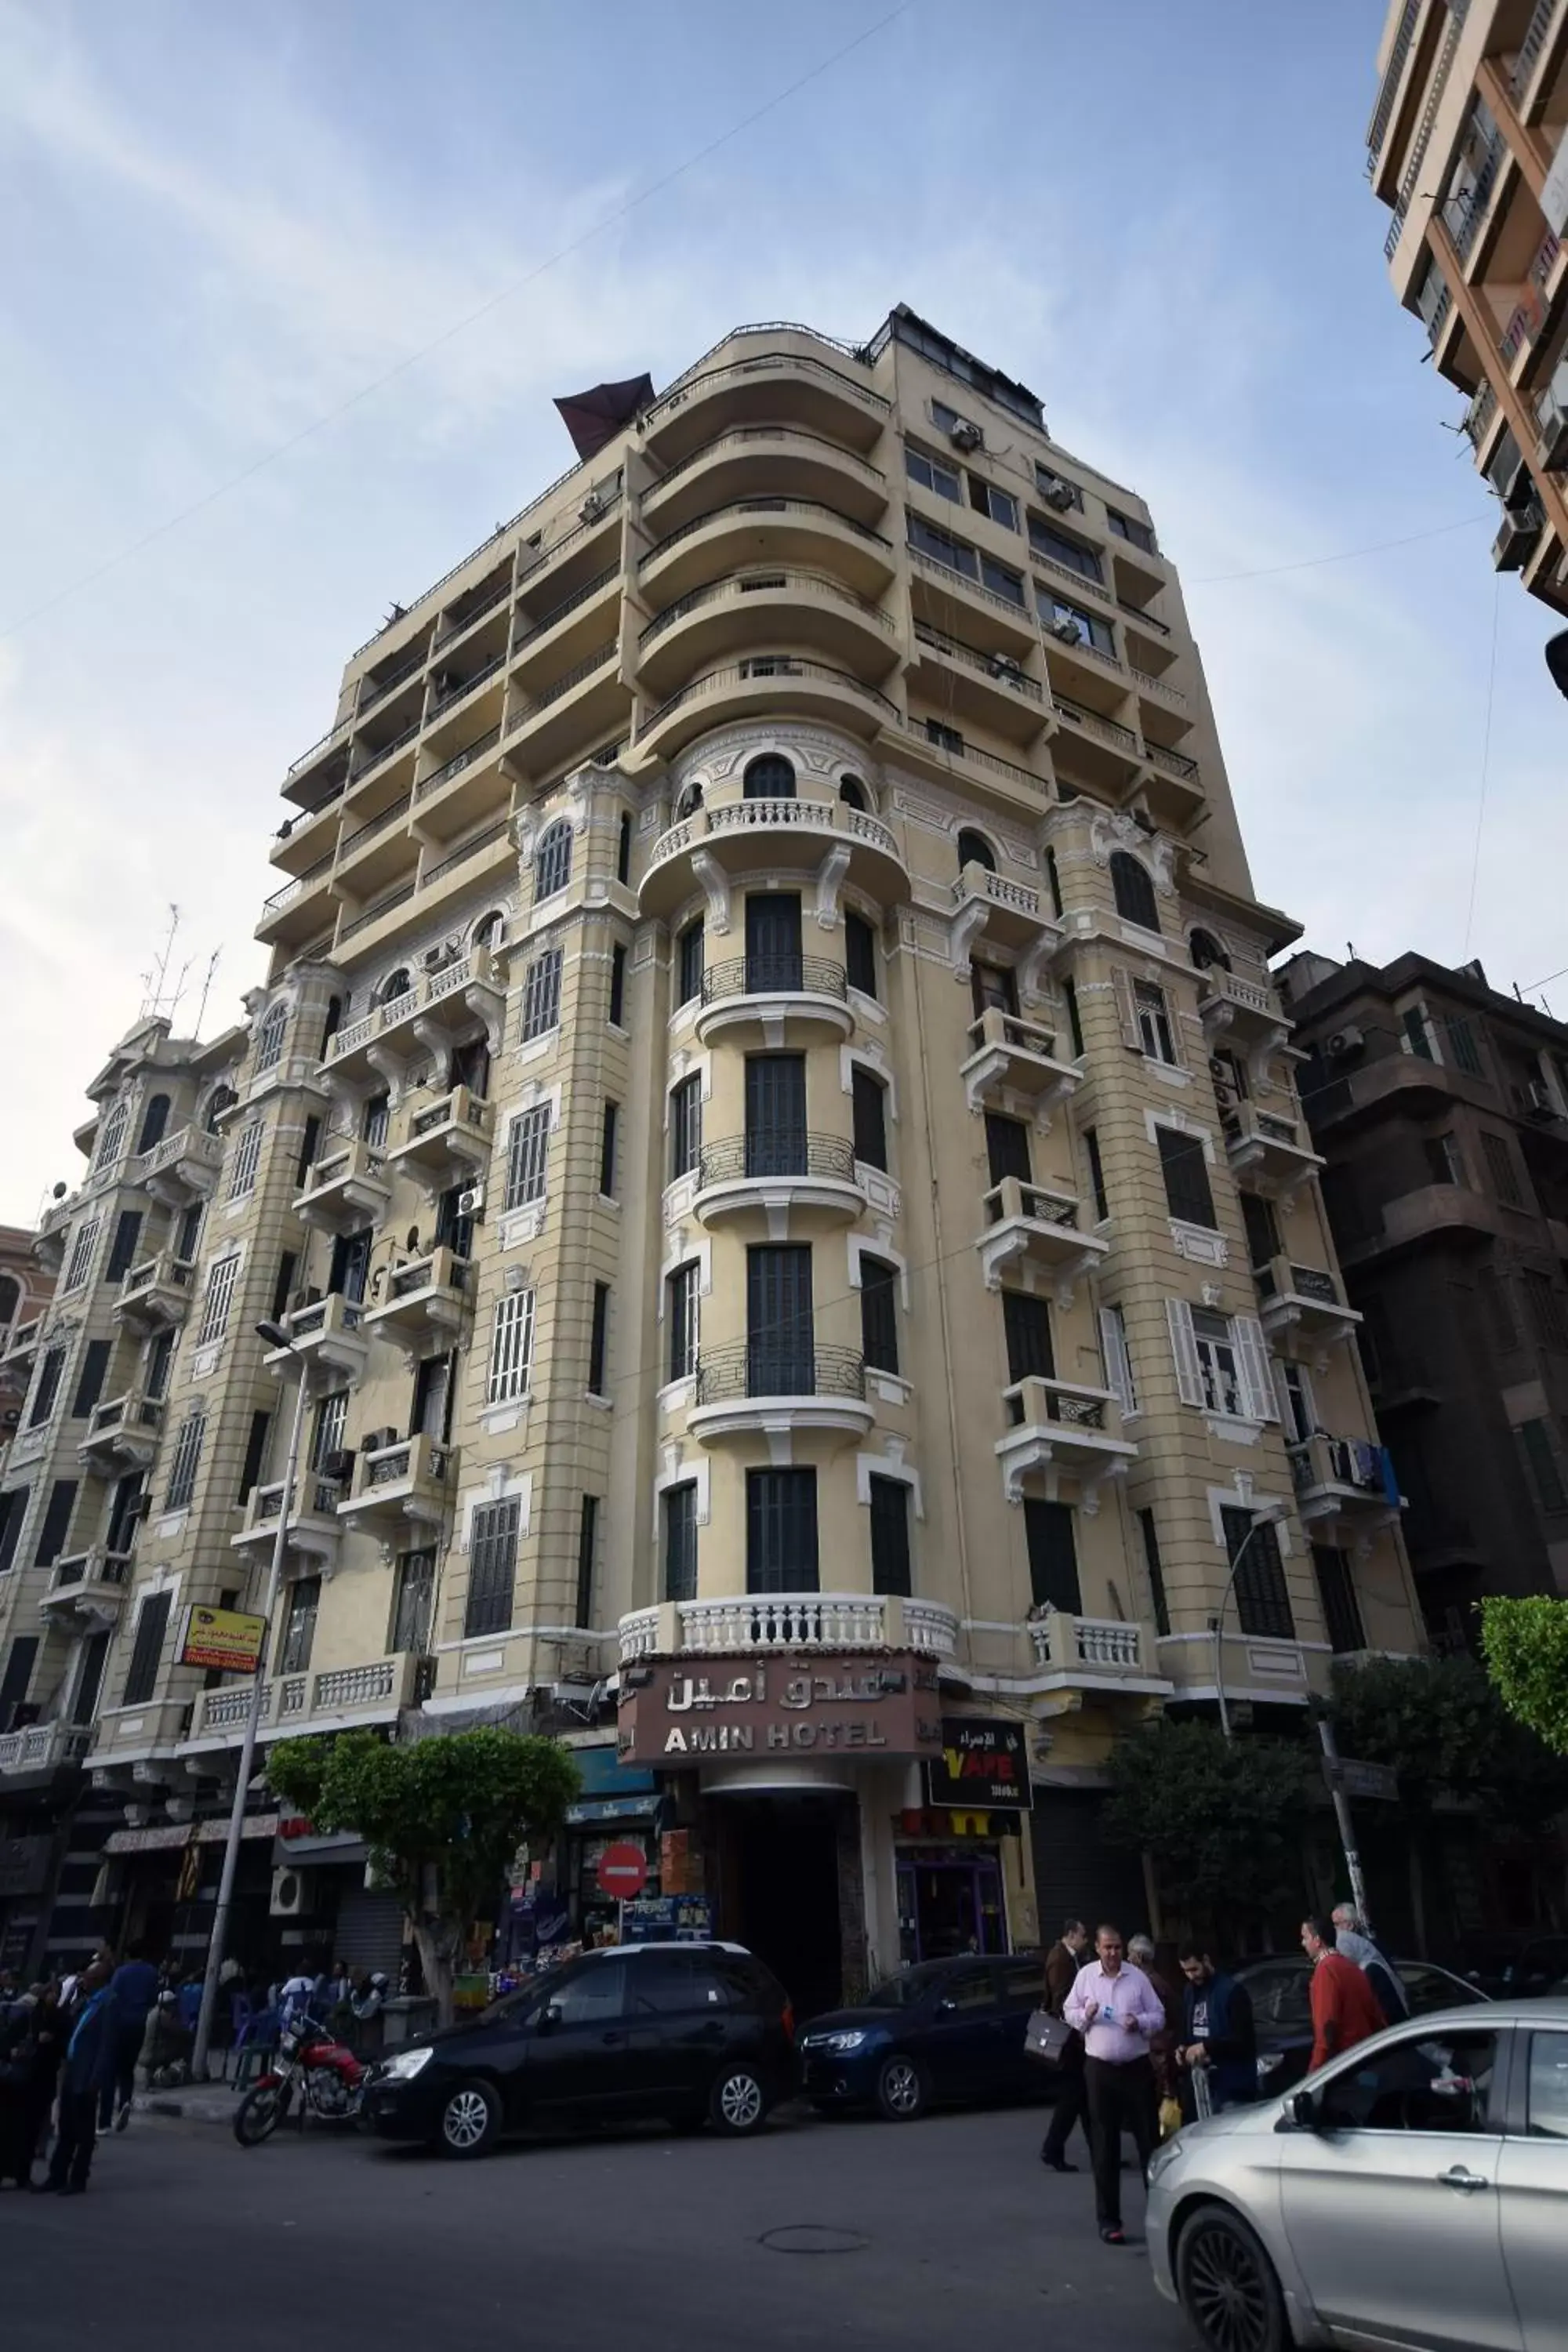 Property Building in Amin Hotel